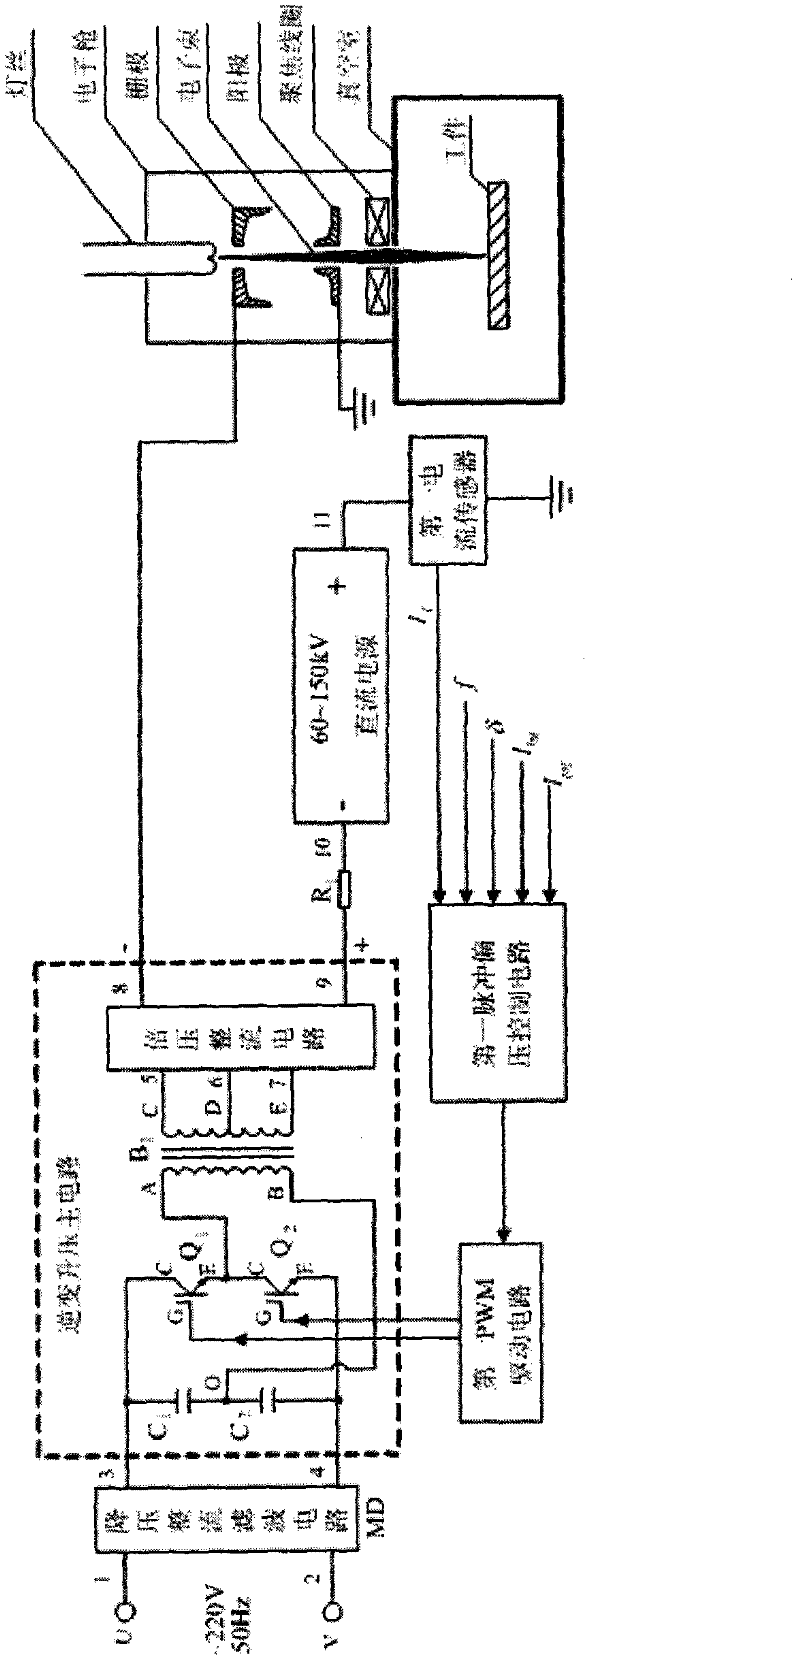 Bias power supply device for supersonic-frequency pulsed electron beam welding